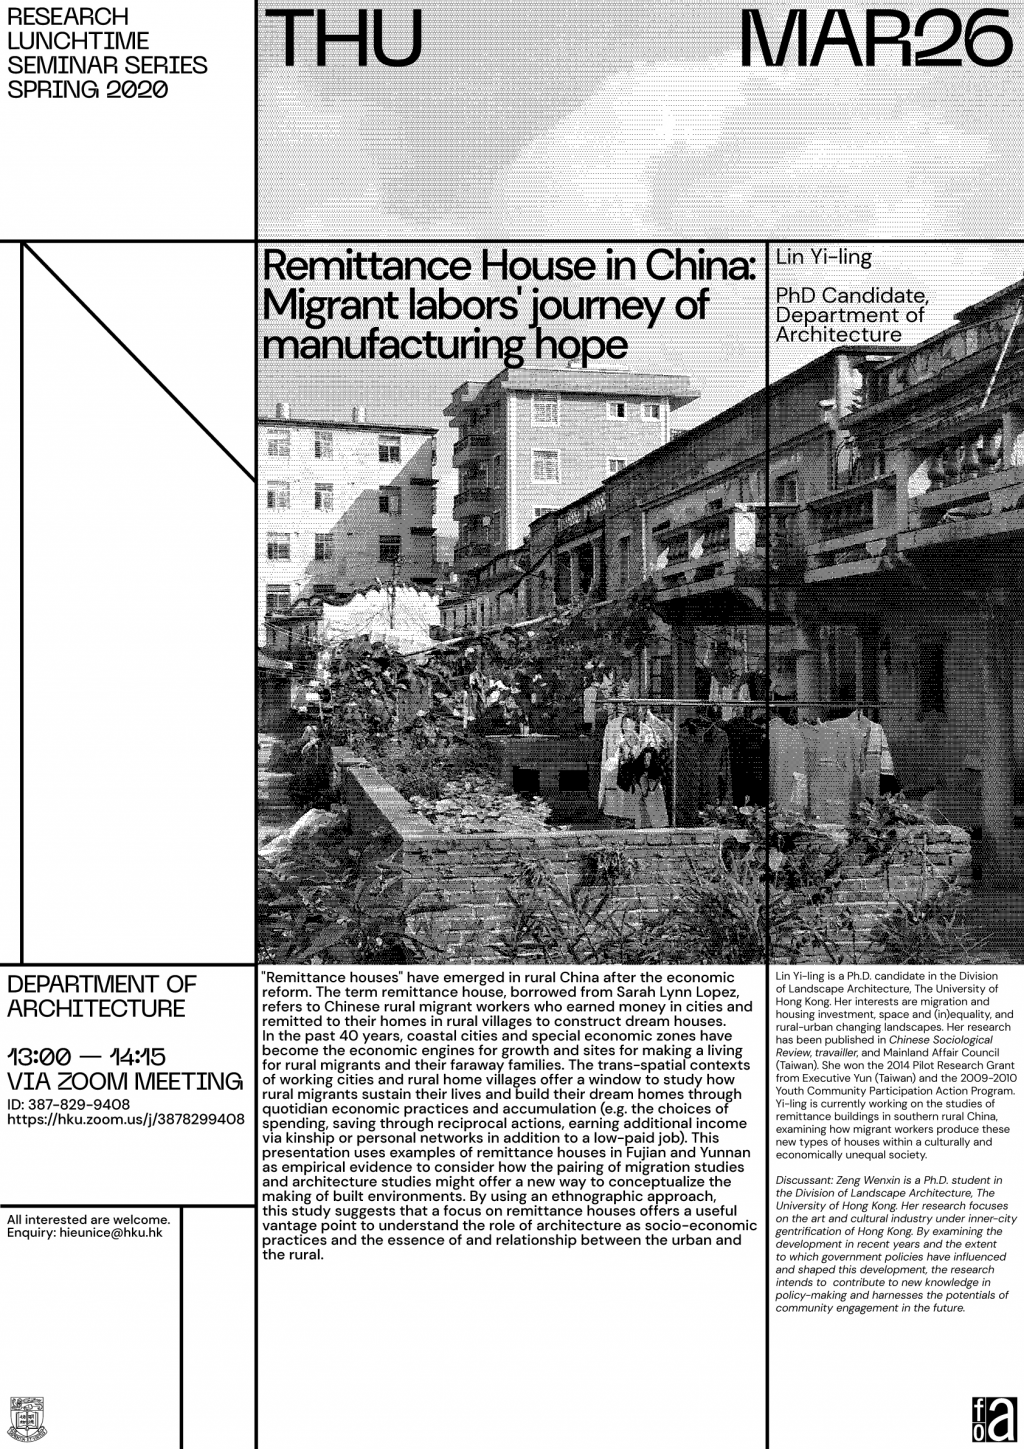 Remittance House in China: Migrant Labors' Journey of Manufacturing Hope